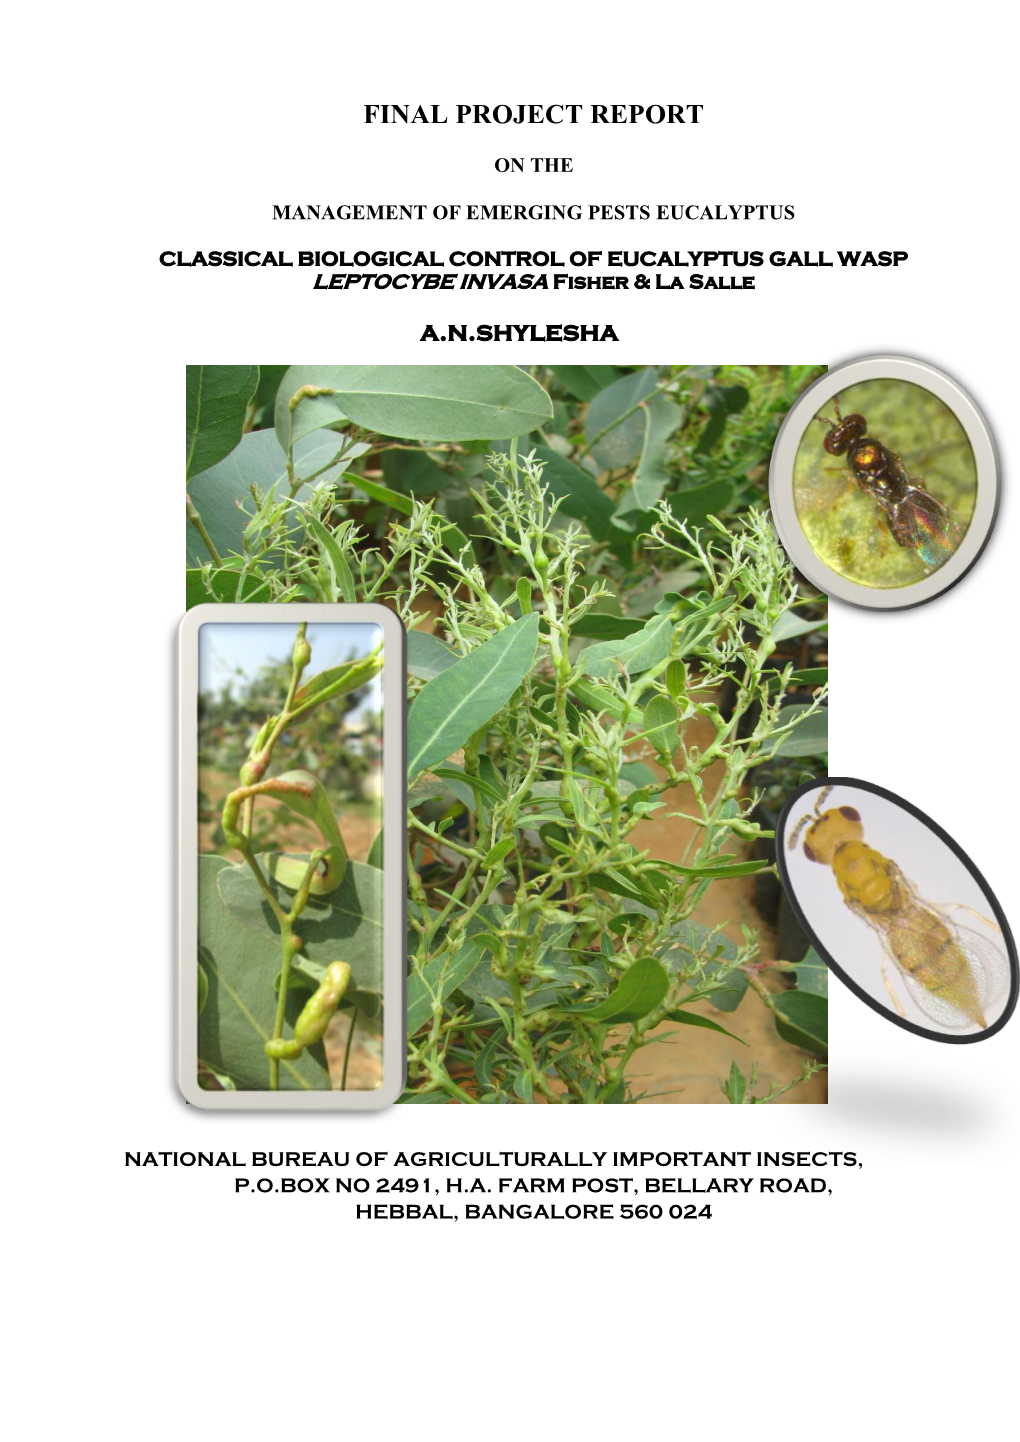 CLASSICAL BIOLOGICAL CONTROL of EUCALYPTUS GALL WASP LEPTOCYBE INVASA Fisher & La Salle